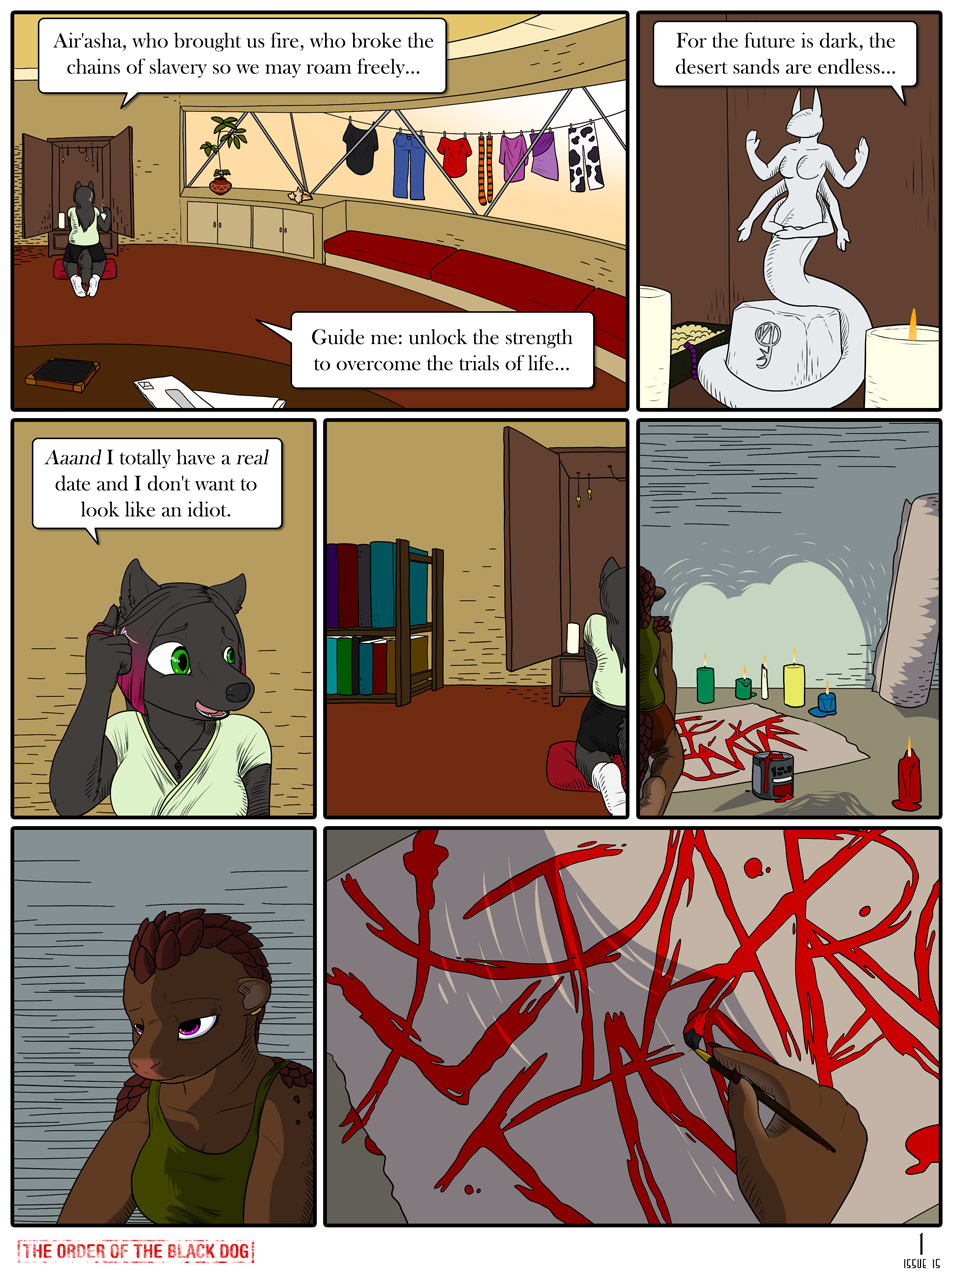 Issue 15, Page 1